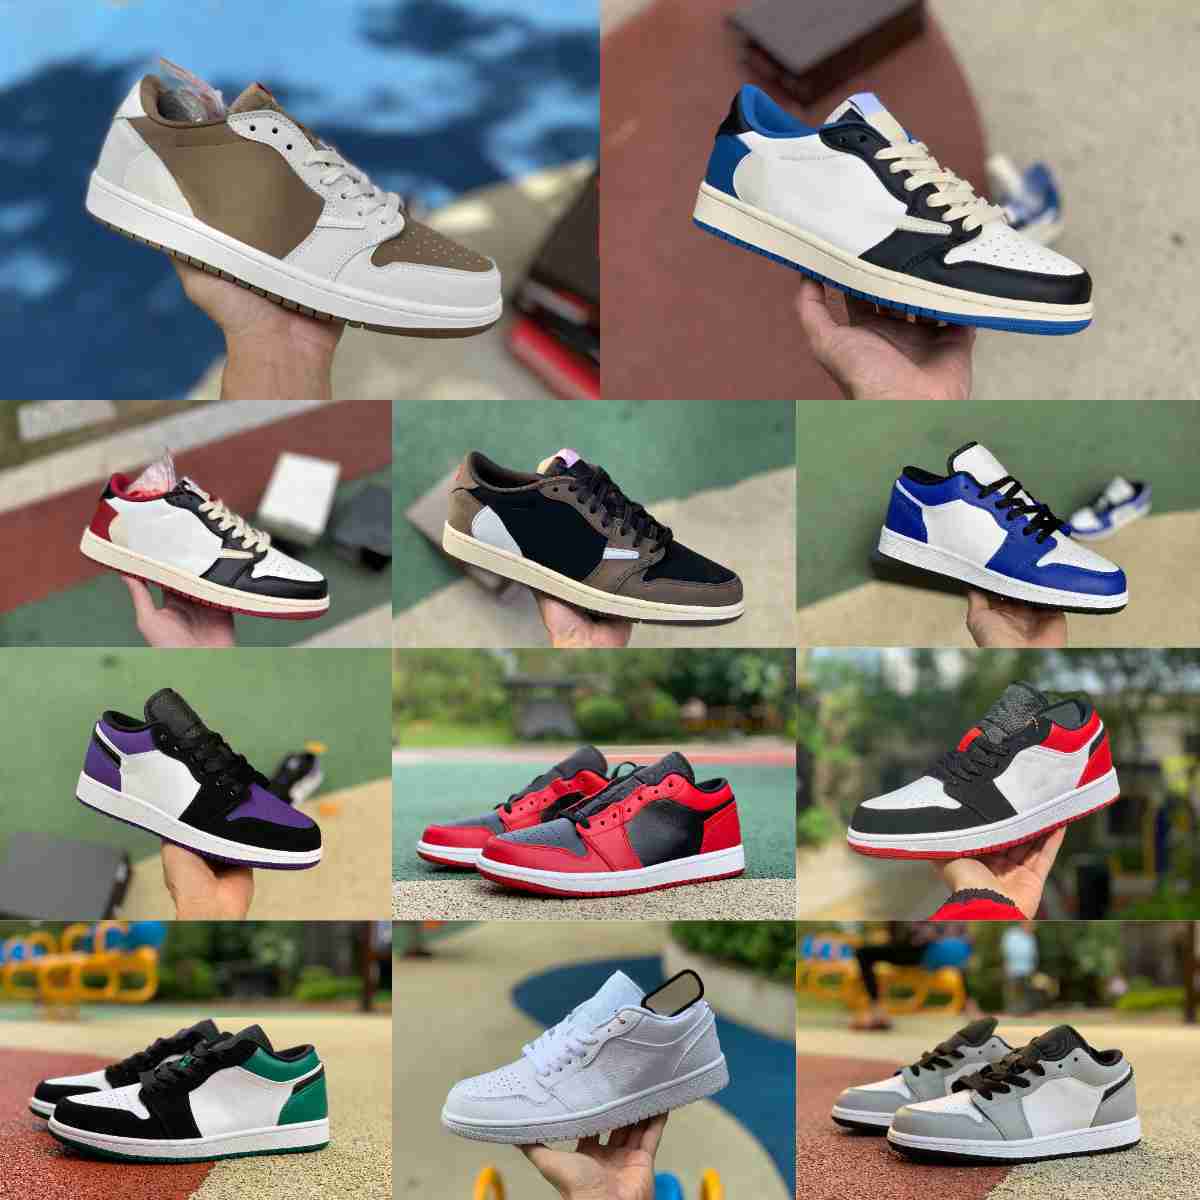 

Fragment TS Jumpman 1 1S Low Basketball Shoes Train Crimson Tint White Brown Red Gold Grey Toe UNC Court Purple Black Shadow Panda Emerald Designer Sports Sneakers S29, Please contact us